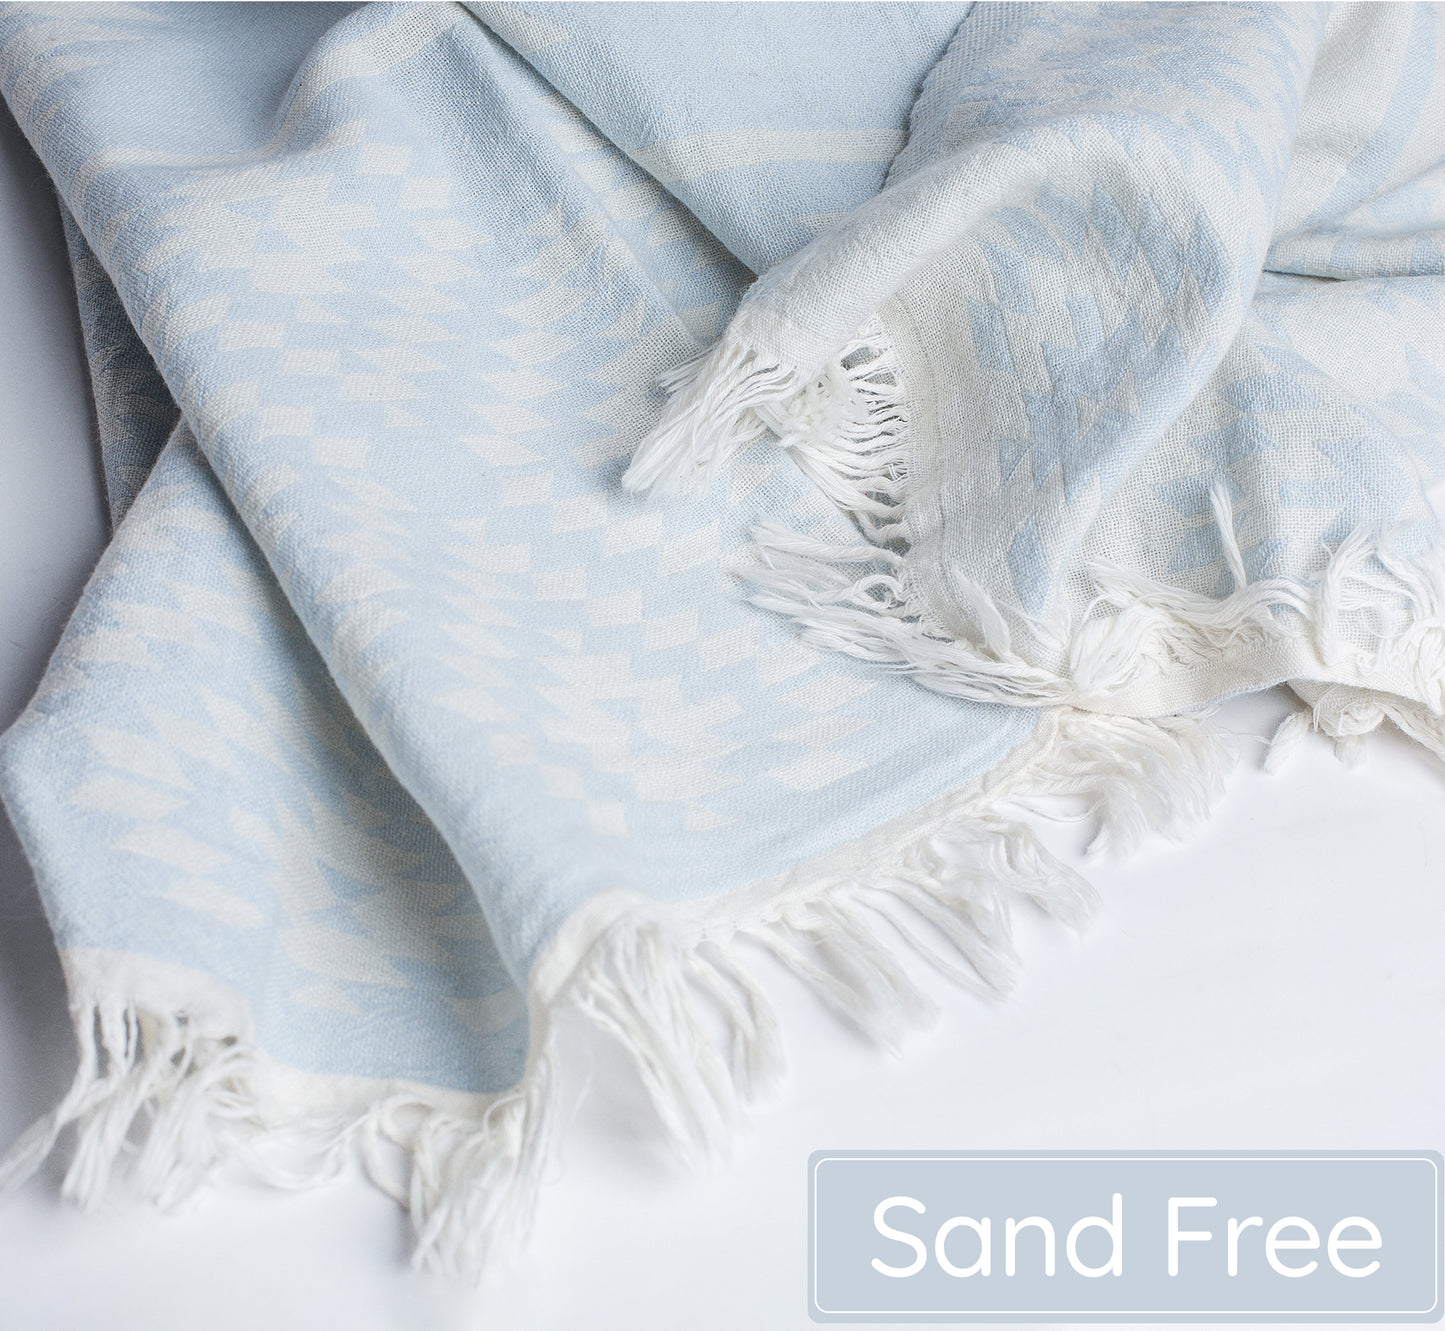 Aqua Color Turkish Beach Towels (35”x67”)  Lightweight, Quick drying and Sand Free Can be Used as Beach Blanket 100% Cotton Vintage Design